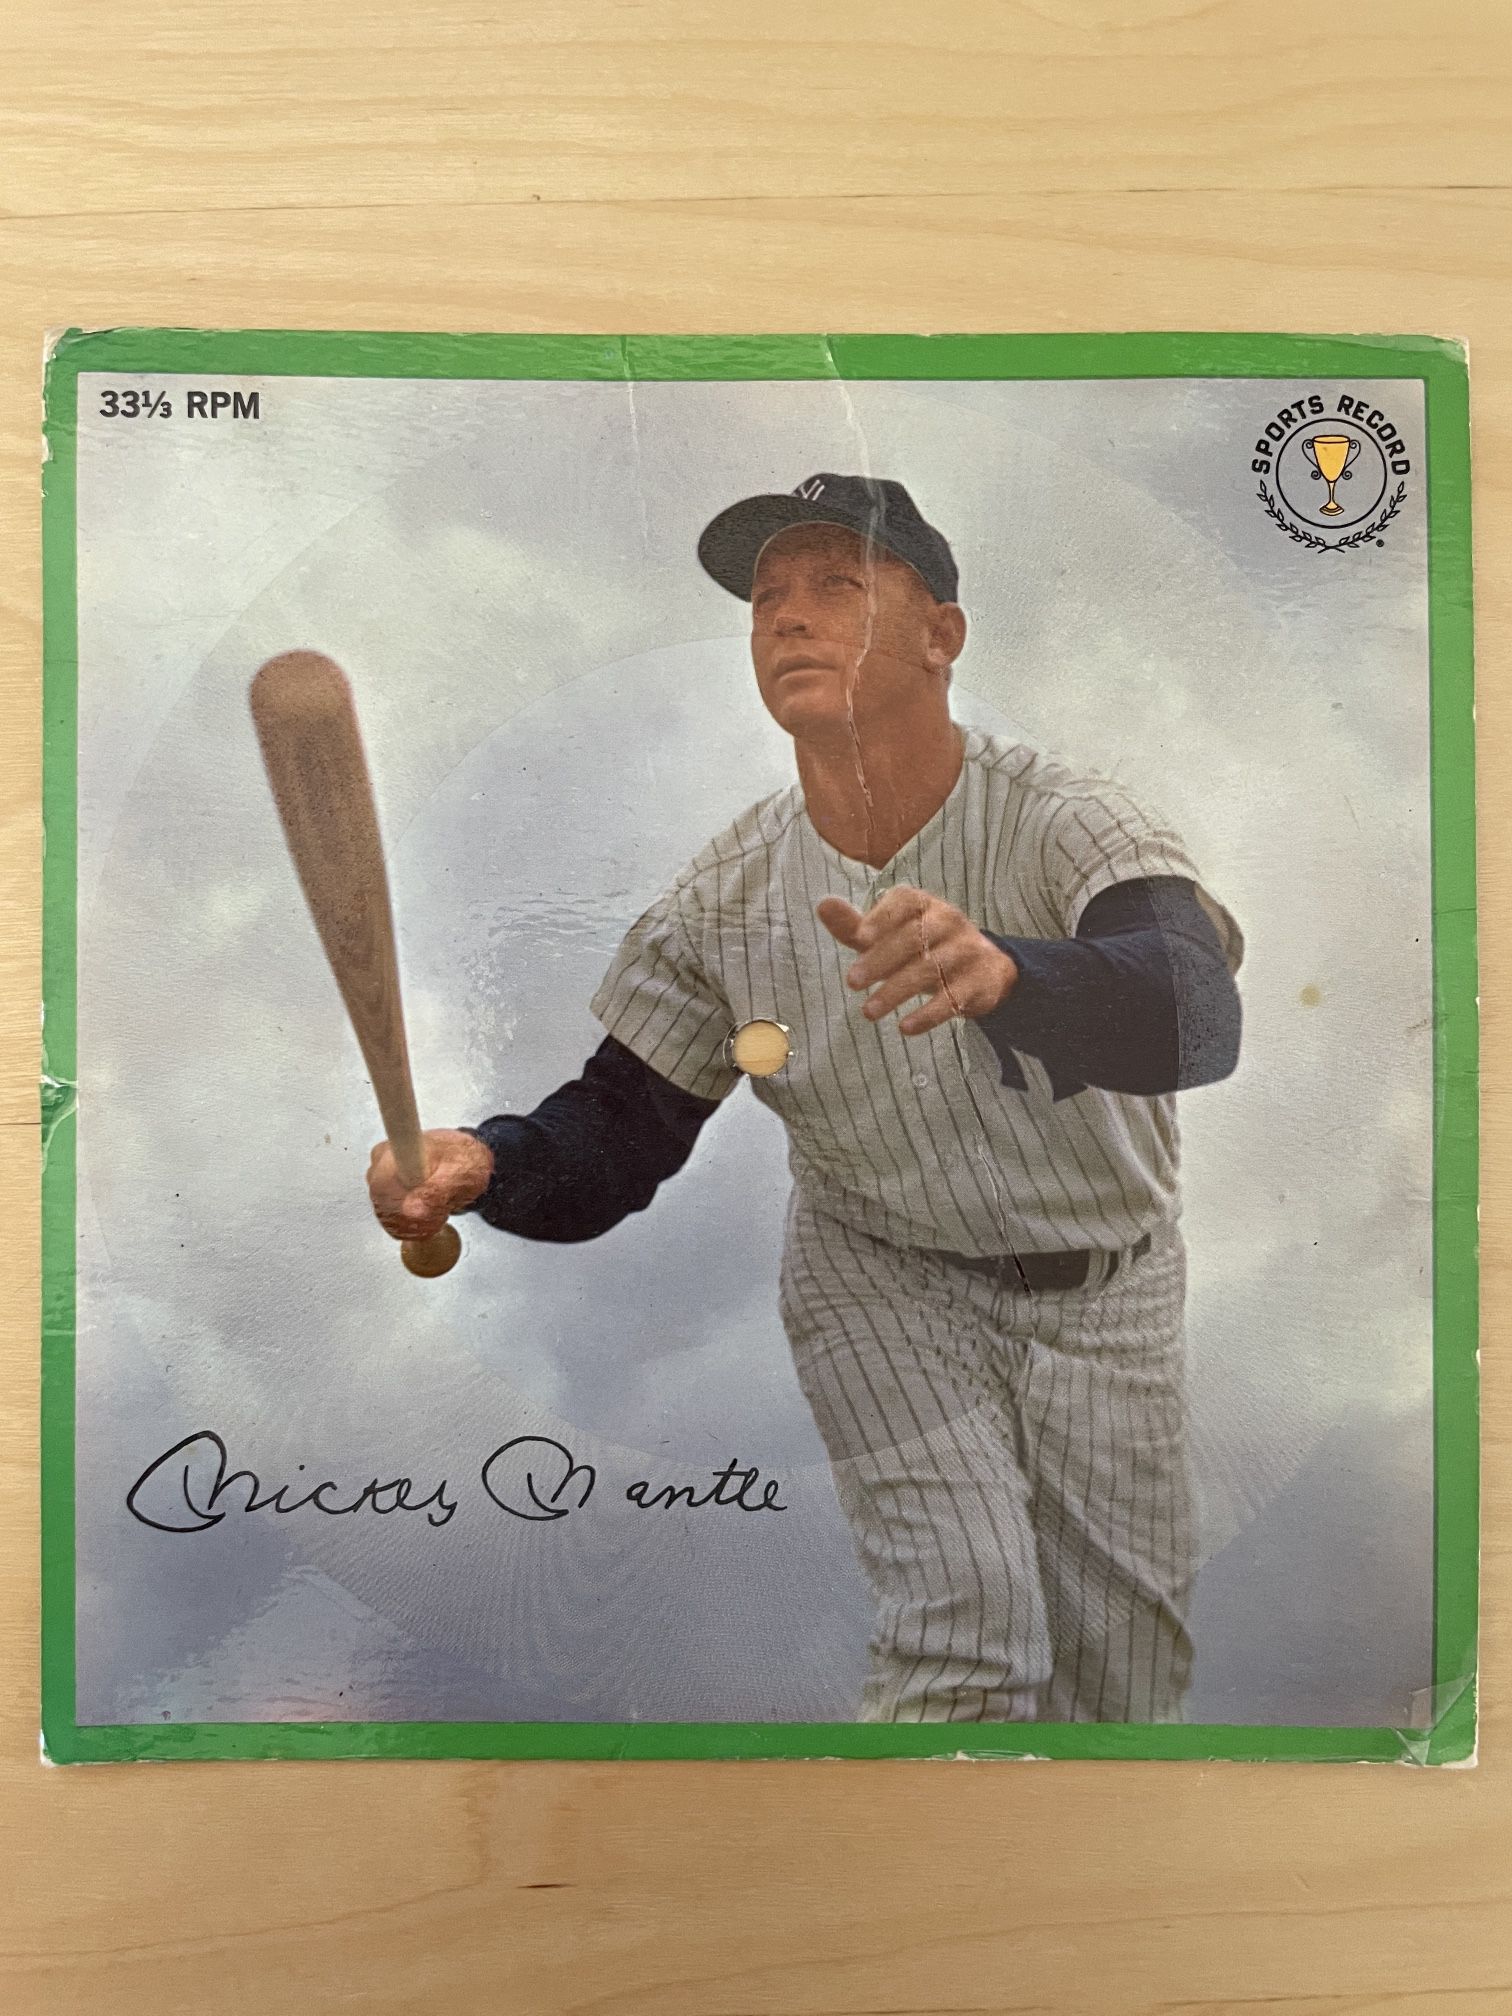 1962 Mickey Mantle 33 1/3 Record Card